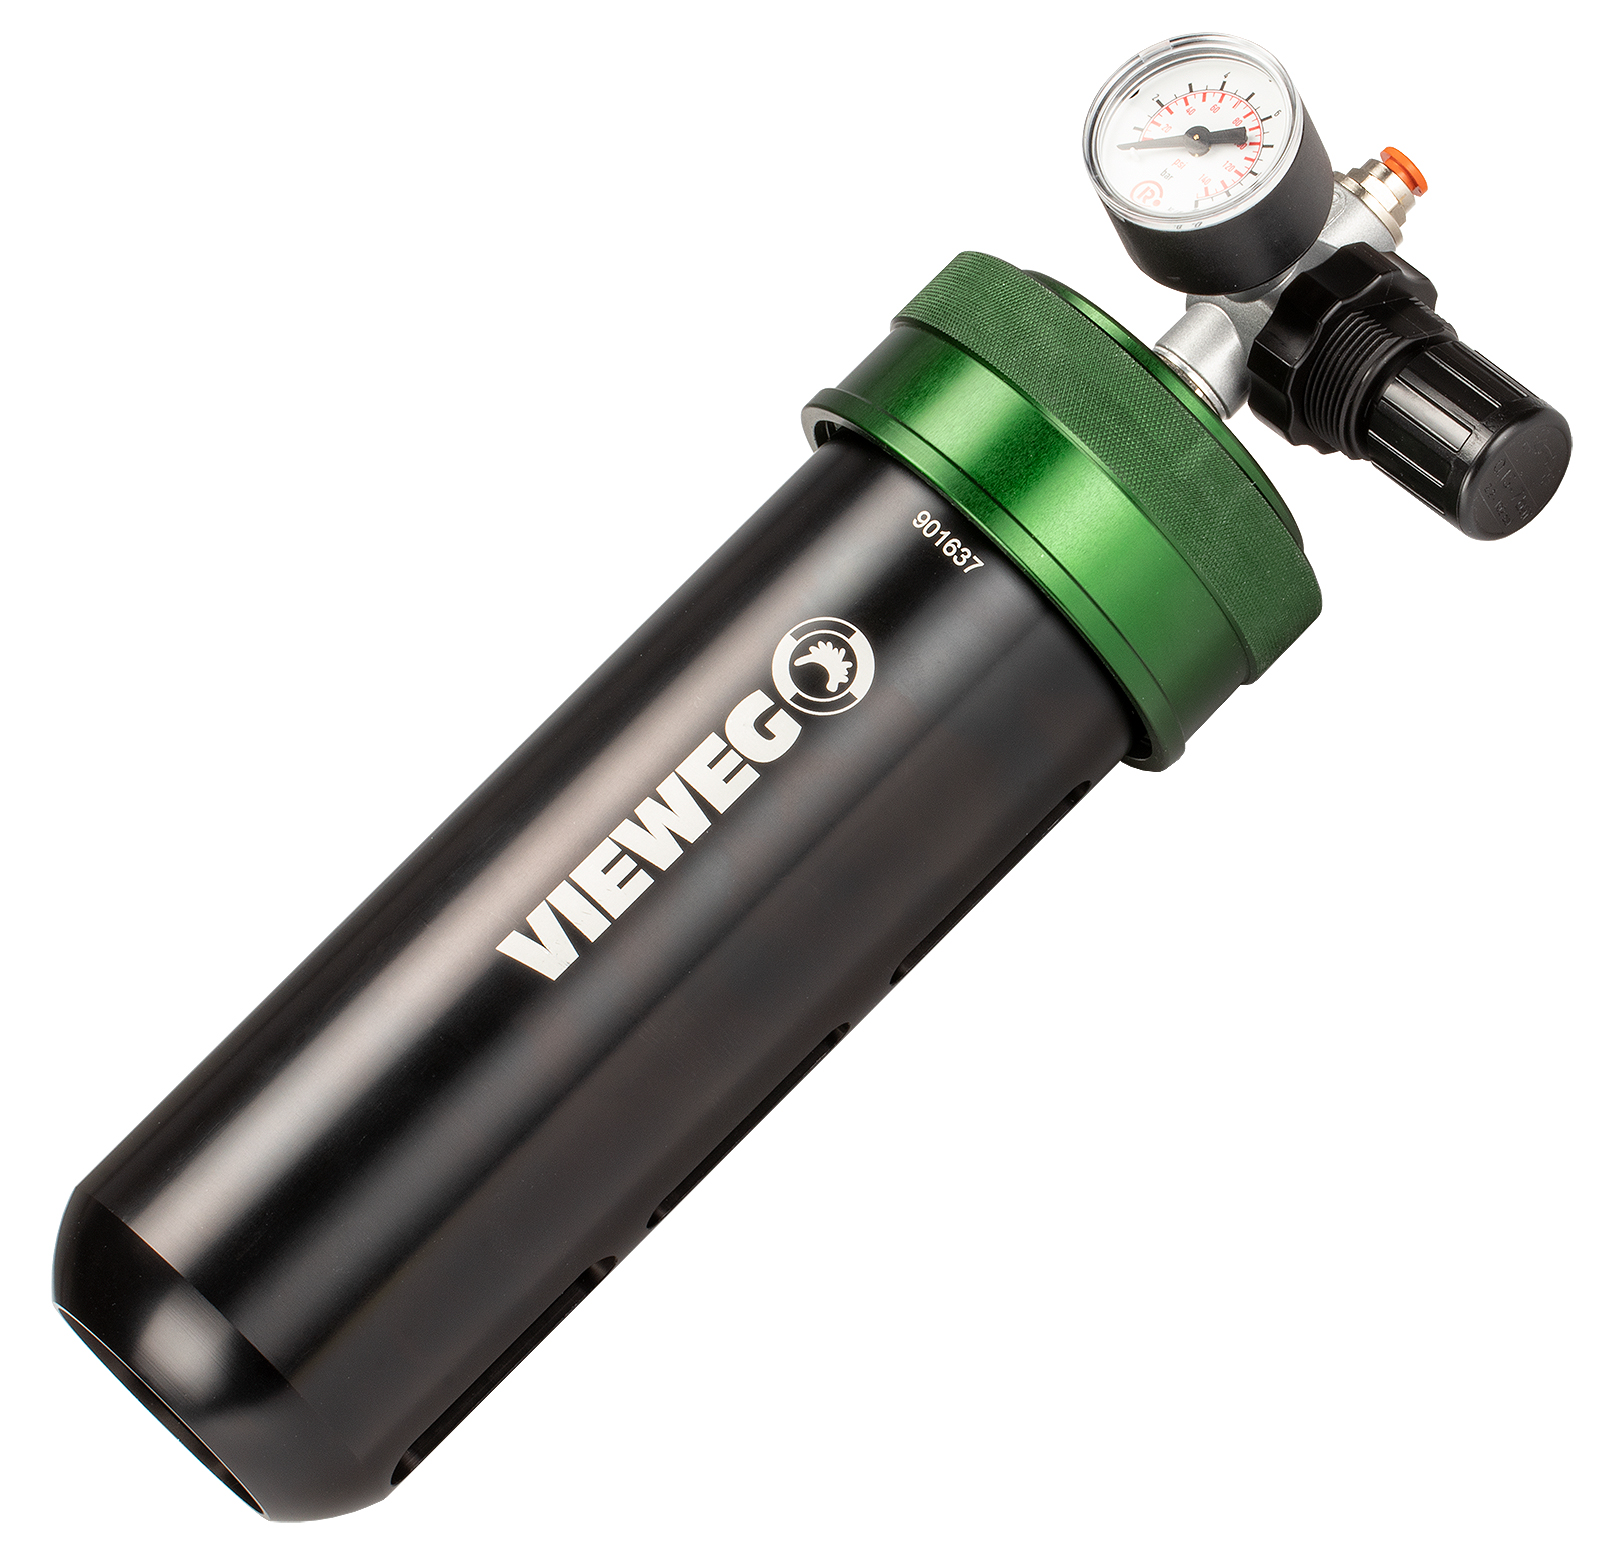 Cartridge sleeve 600 cc with closing cap and pressure gauge